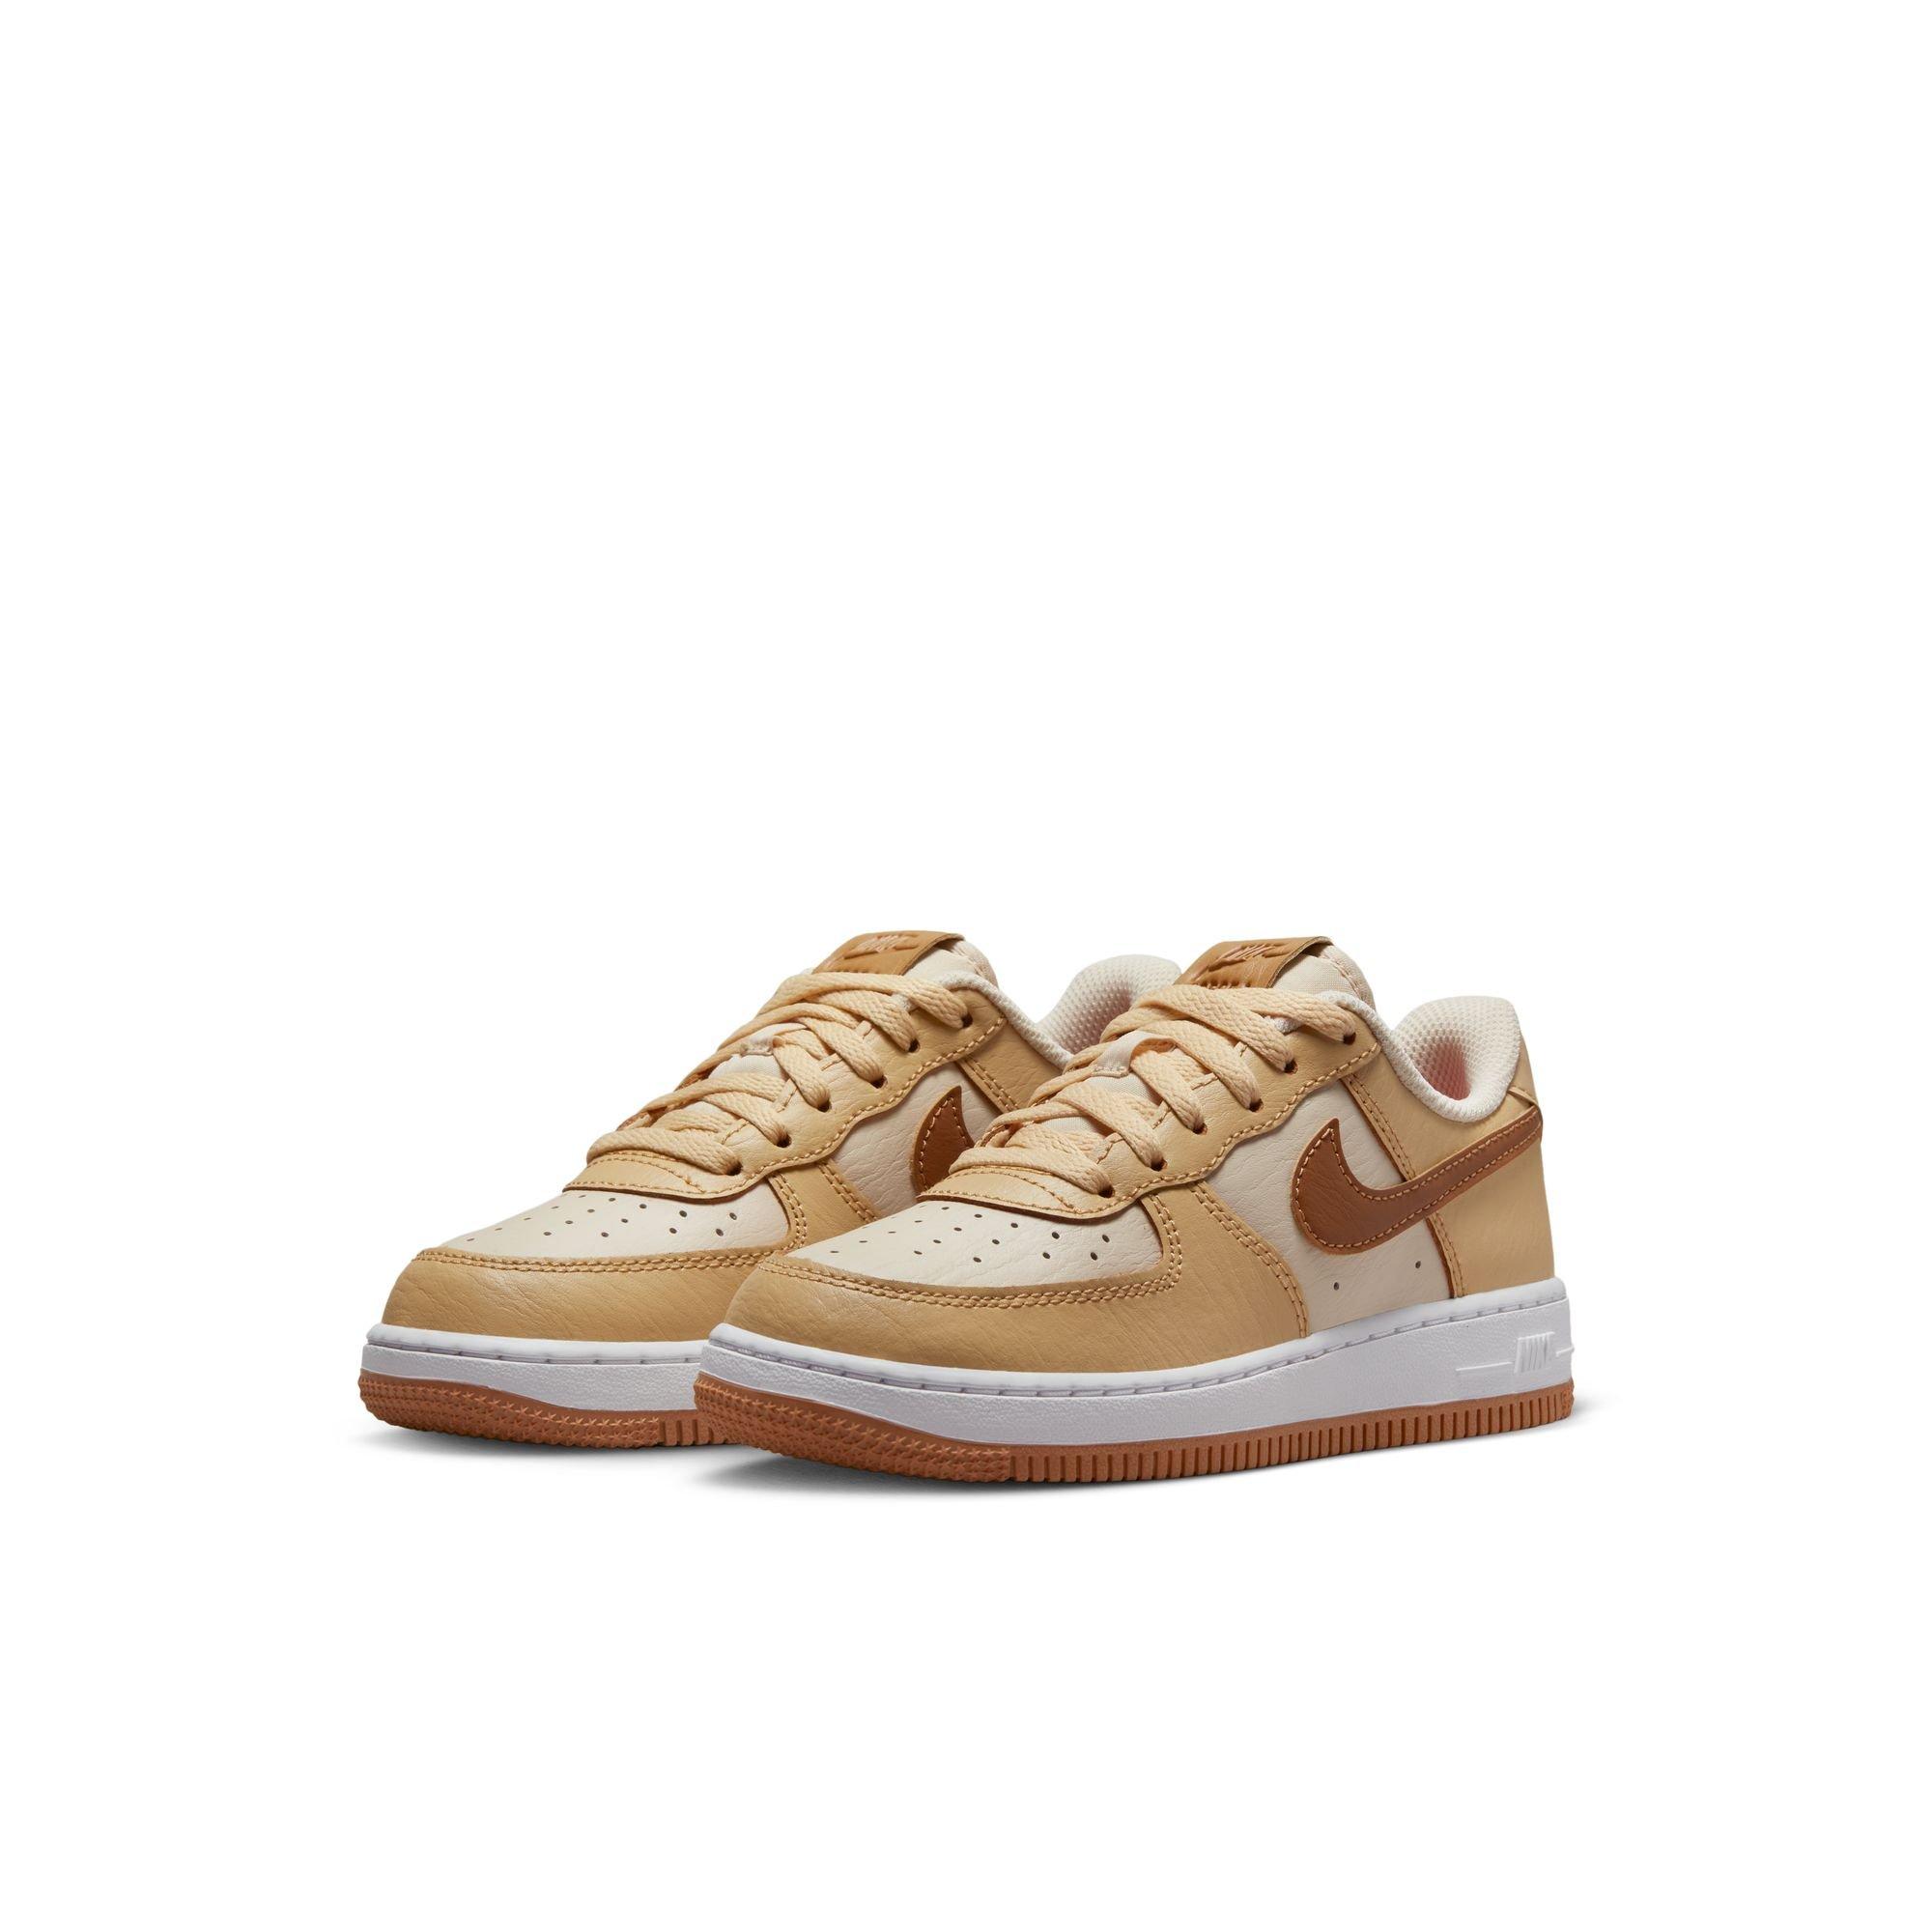 Nike Kids Force 1 LV8 1 (Little Kid) (Pearl White/Ale Brown/Sesame/White) Kid's  Shoes - ShopStyle